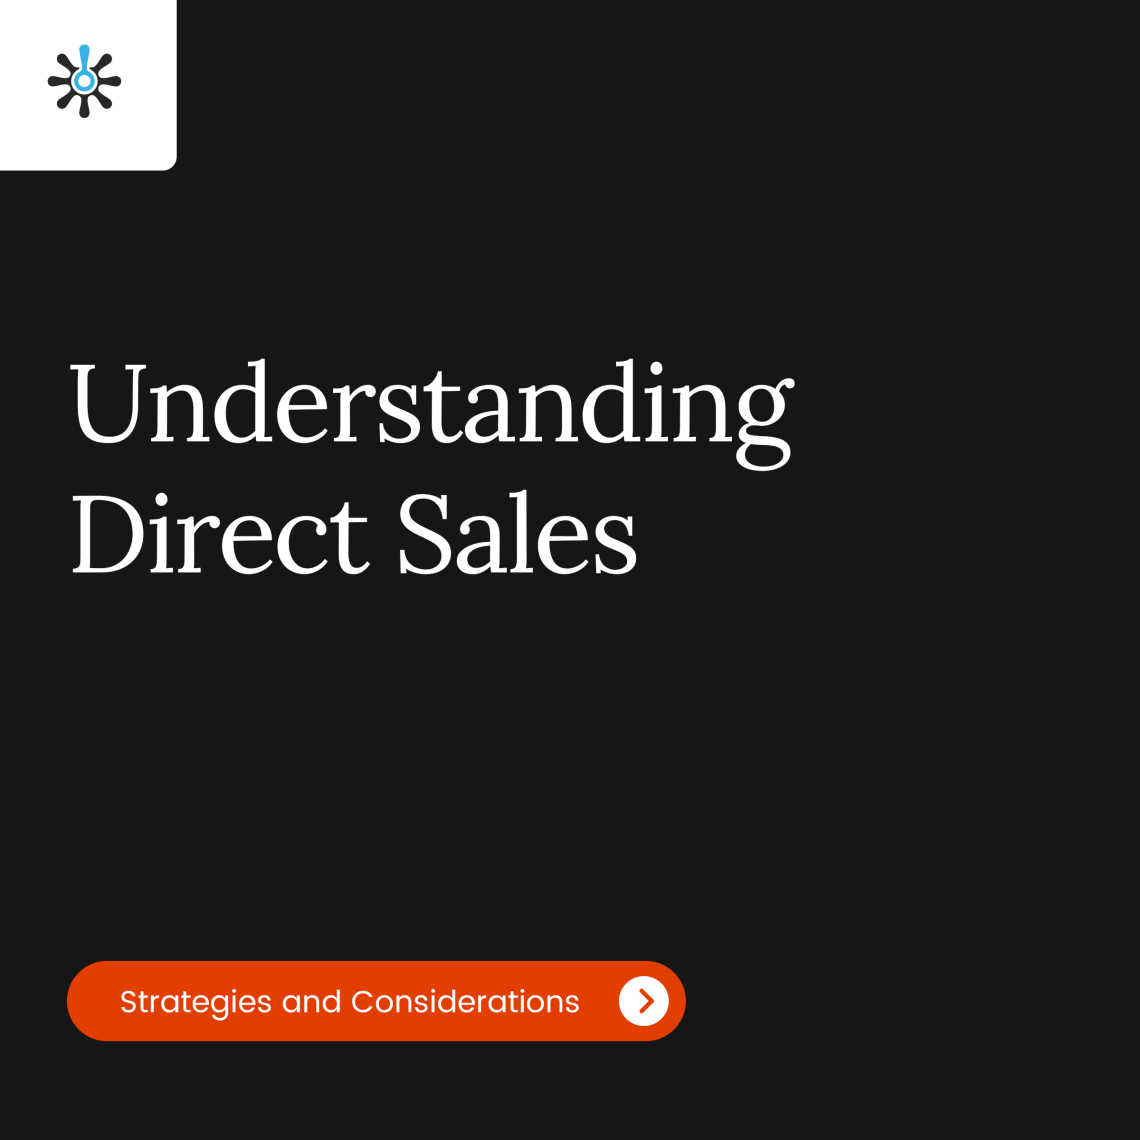 Title Page Reading "Understanding Direct Sales"